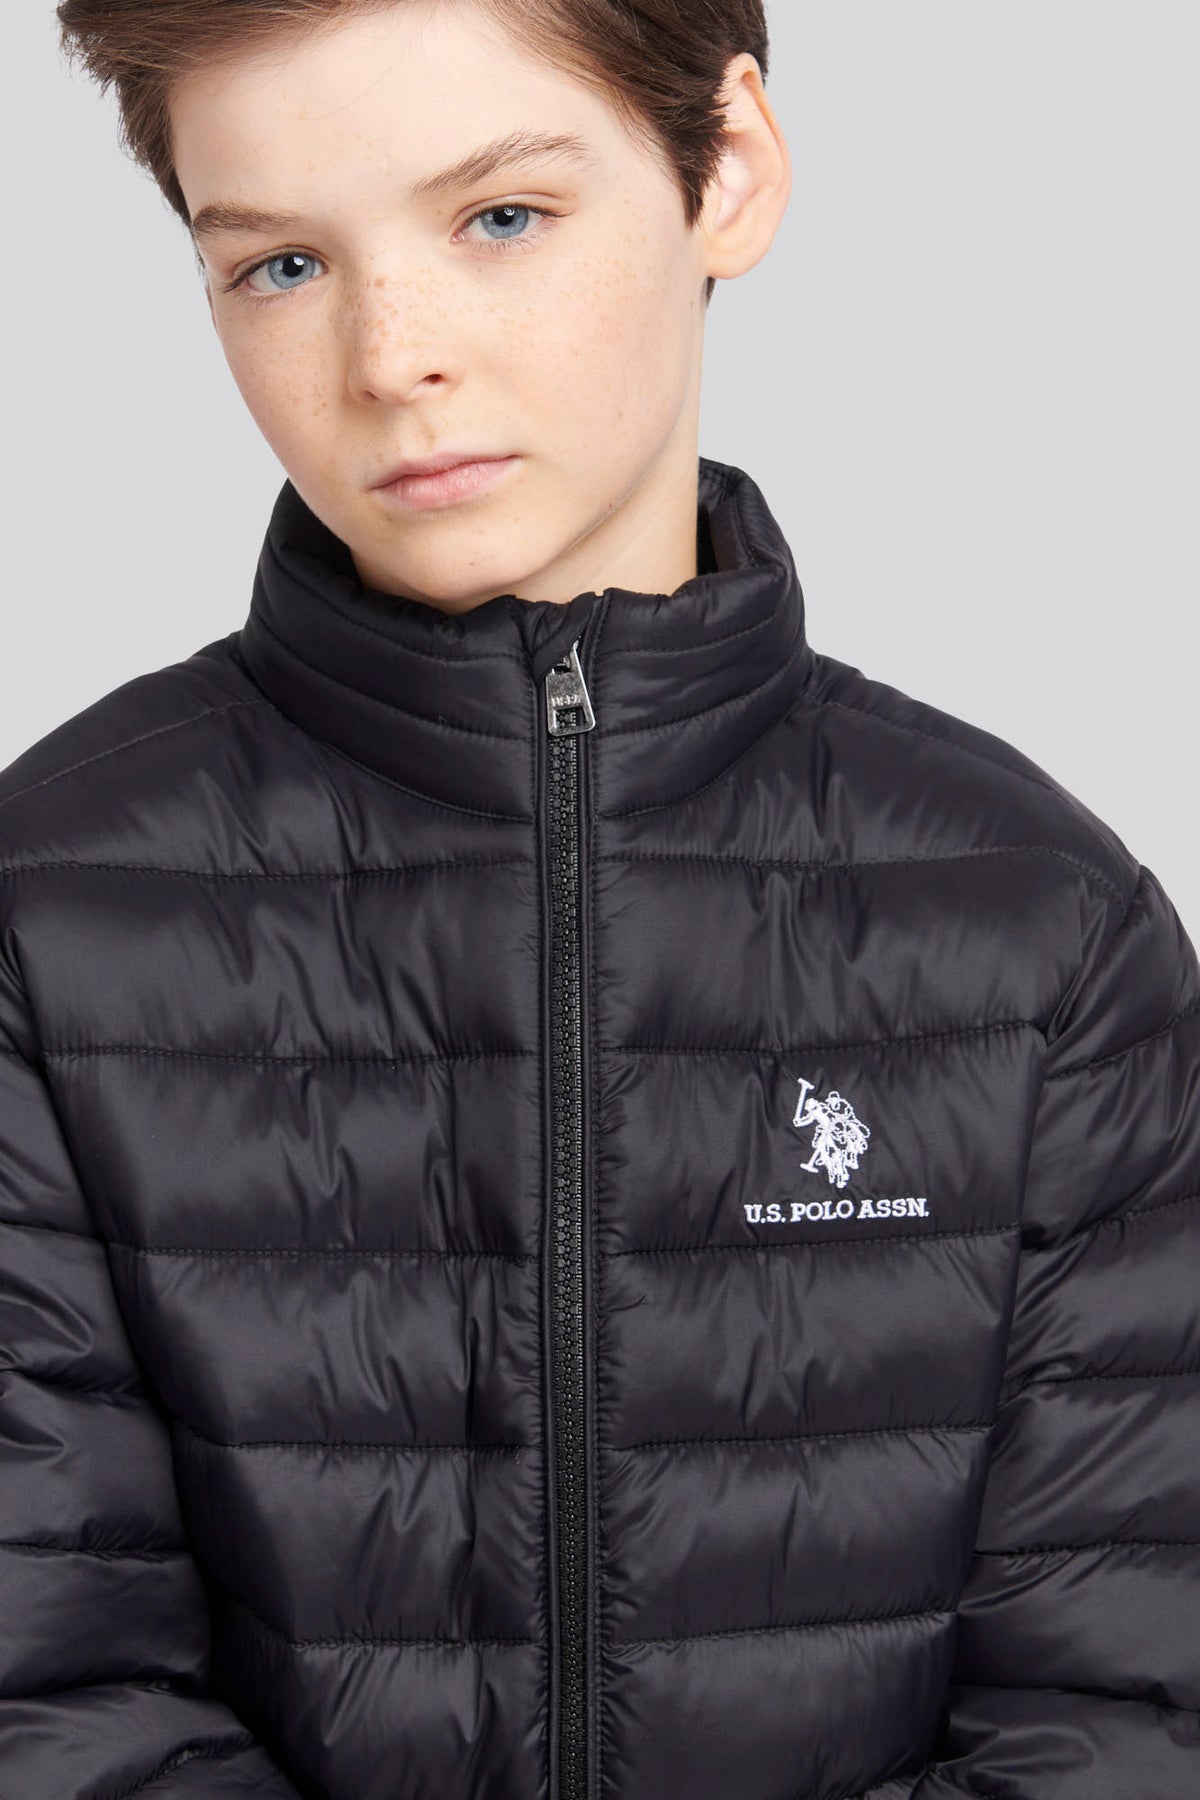 Boys Lightweight Bound Quilted Jacket in Black Bright White DHM